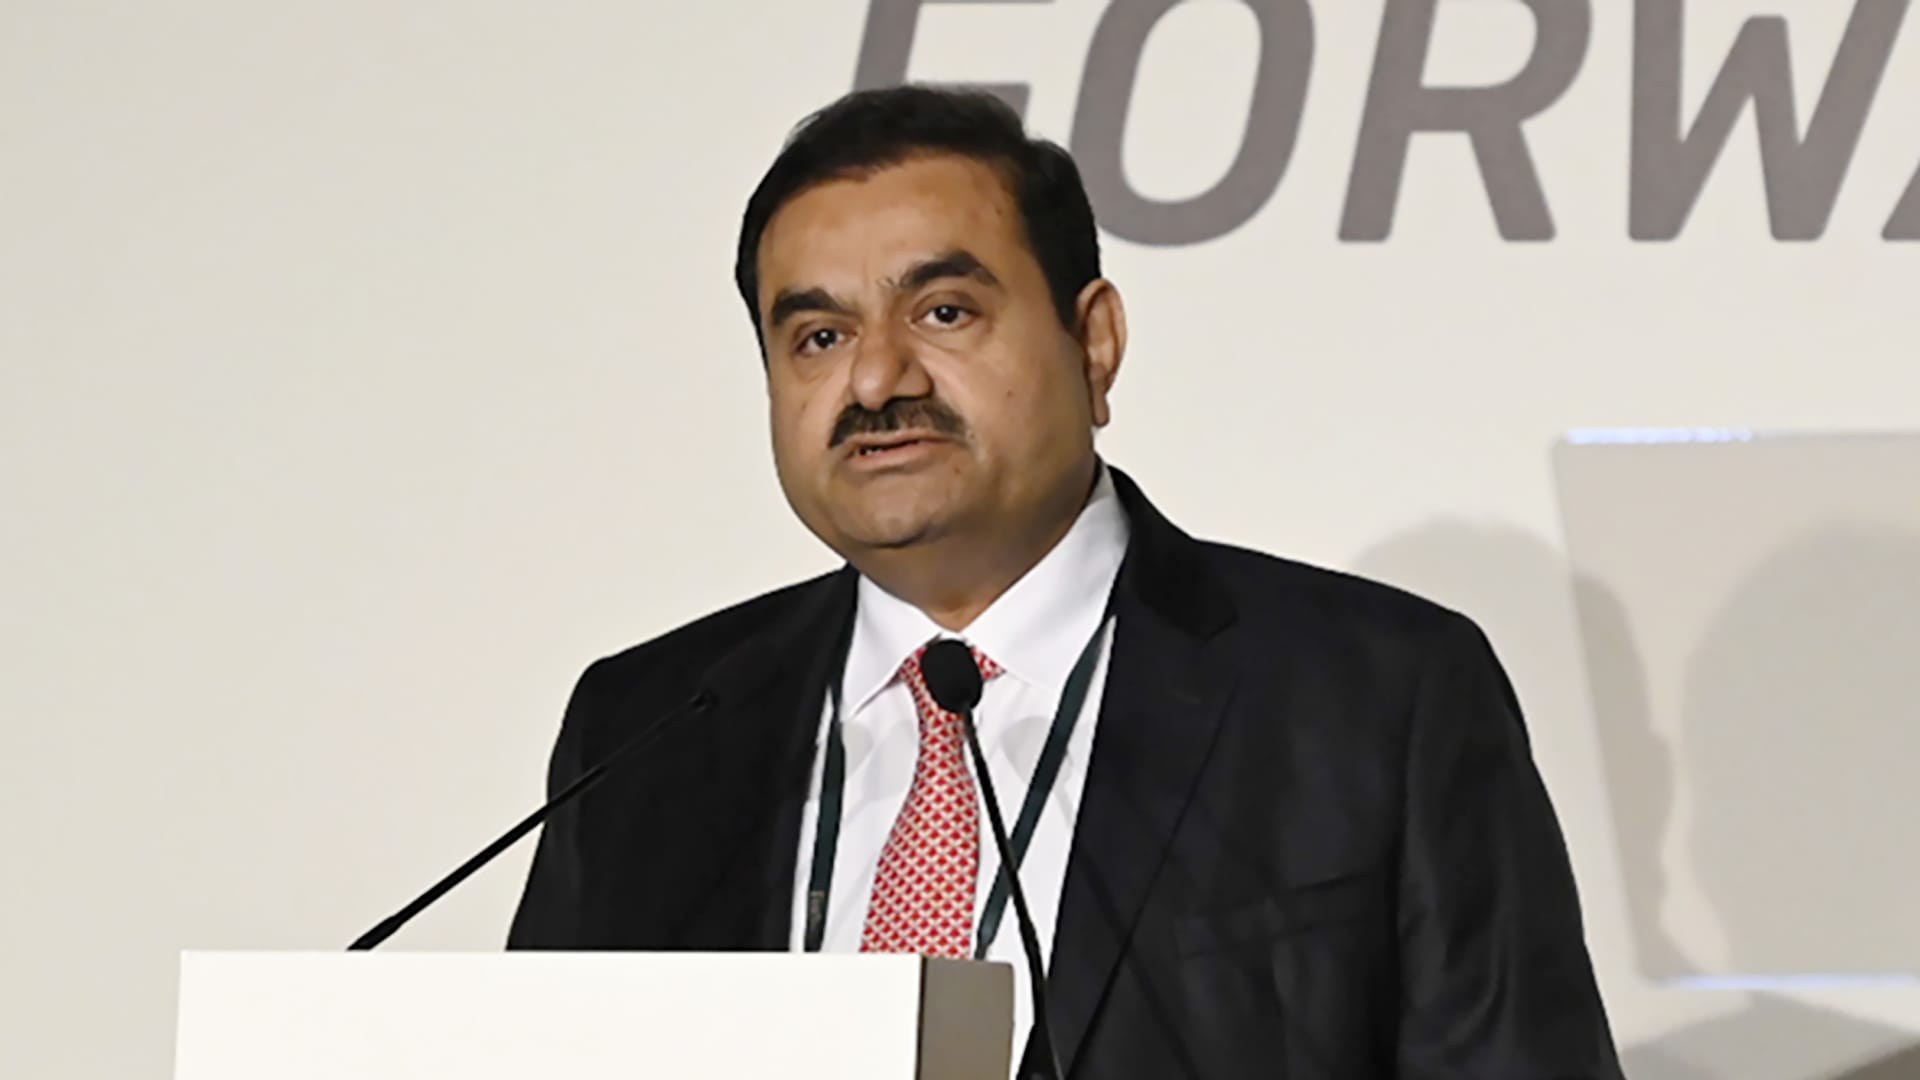 How Gautam Adani became the world's fourth richest person while billionaires like Jeff Bezos lost tens of billions